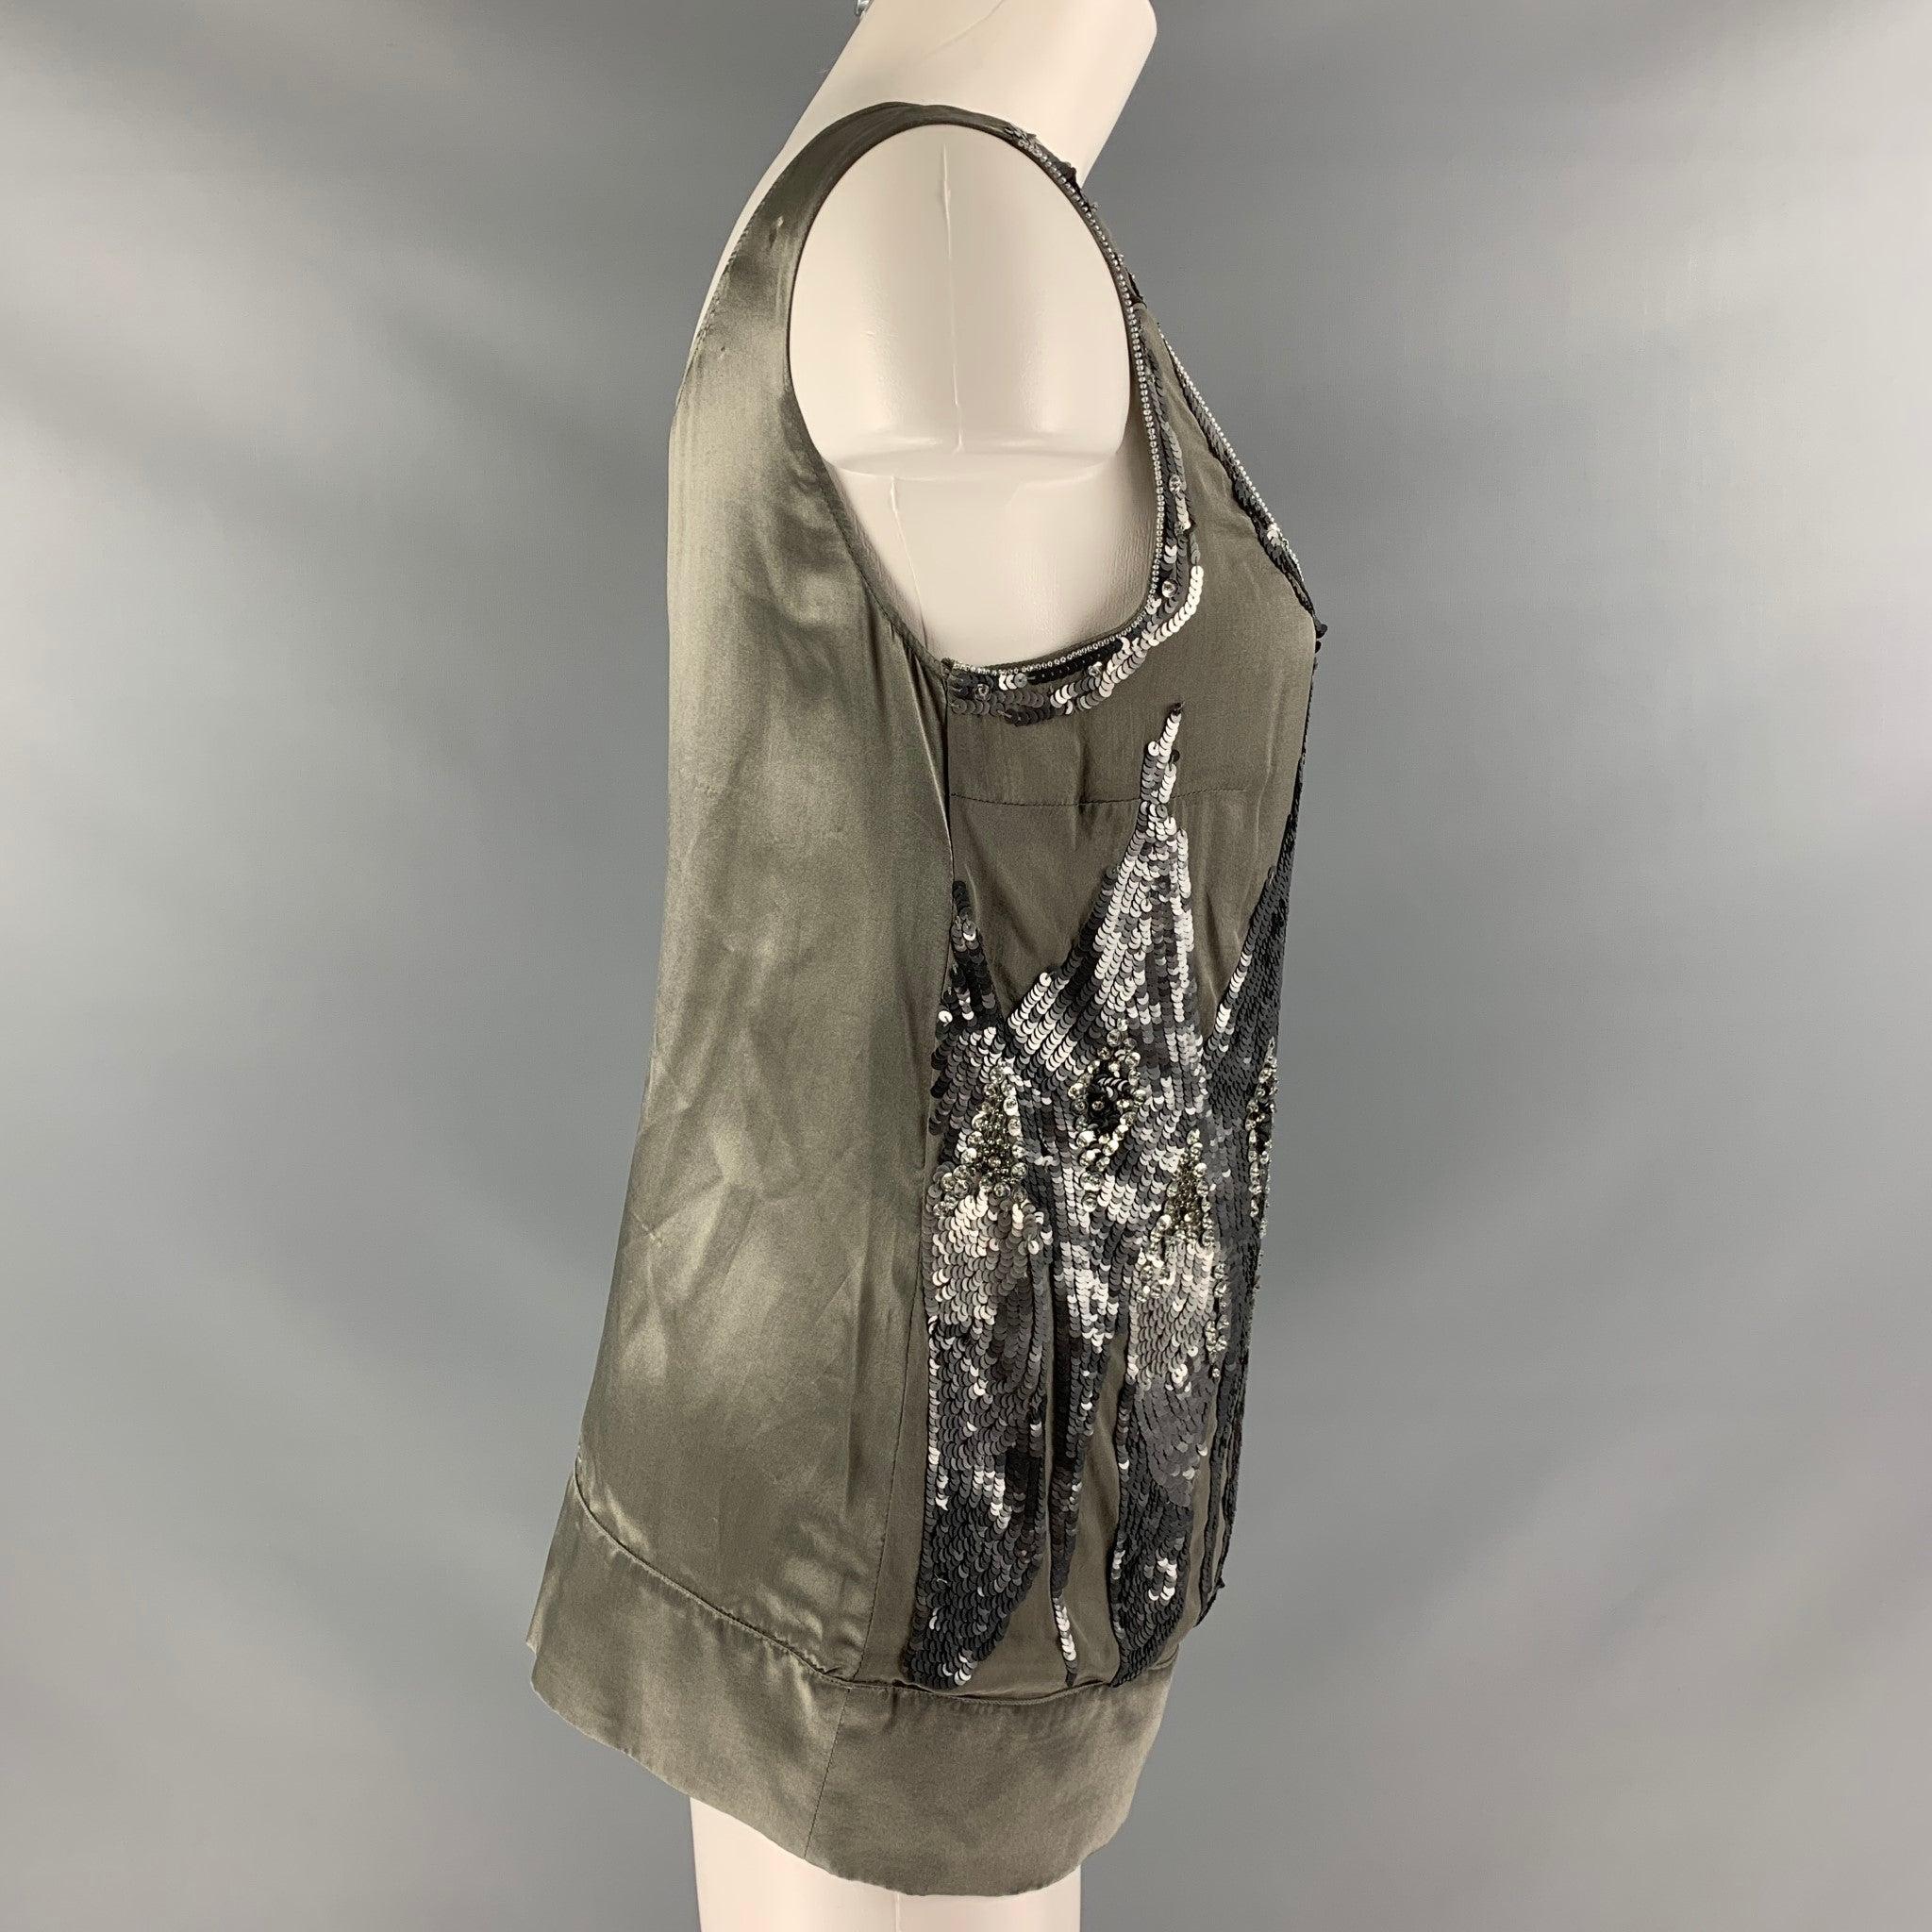 PHILOSOPHY di ALBERTA FERRETTI sleeveless blouse comes in grey and silver silk featuring scoop neck and beaded and sequins embroidery at front. Made in Italy.Very Good Pre-Owned Condition.  

Marked:   4 

Measurements: 
 
Shoulder: 13 inBust: 34